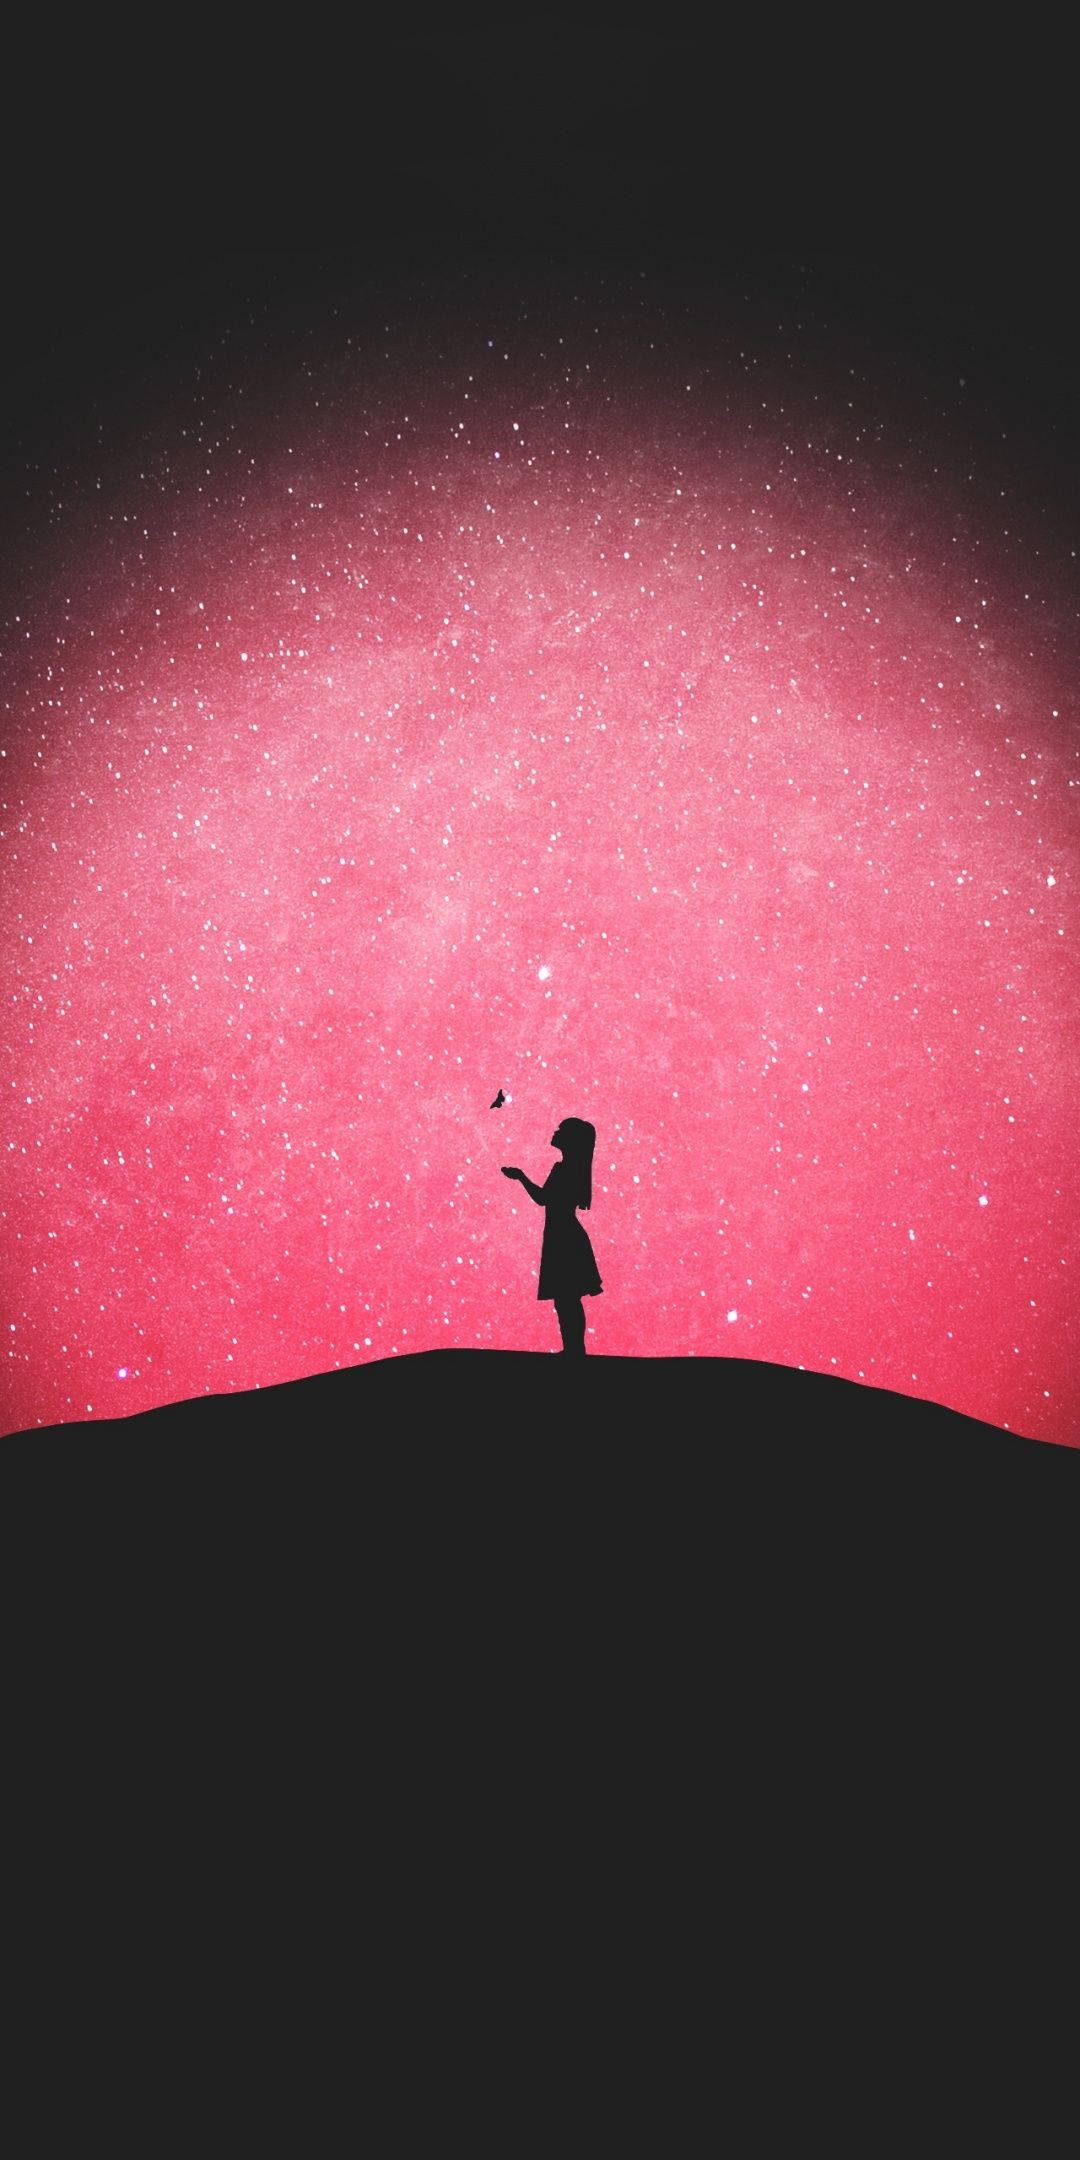 1080x2160 Starry night, girl, outdoor, silhouette, wallpaper | Starry night wallpaper, Galaxy painting, Starry night painting